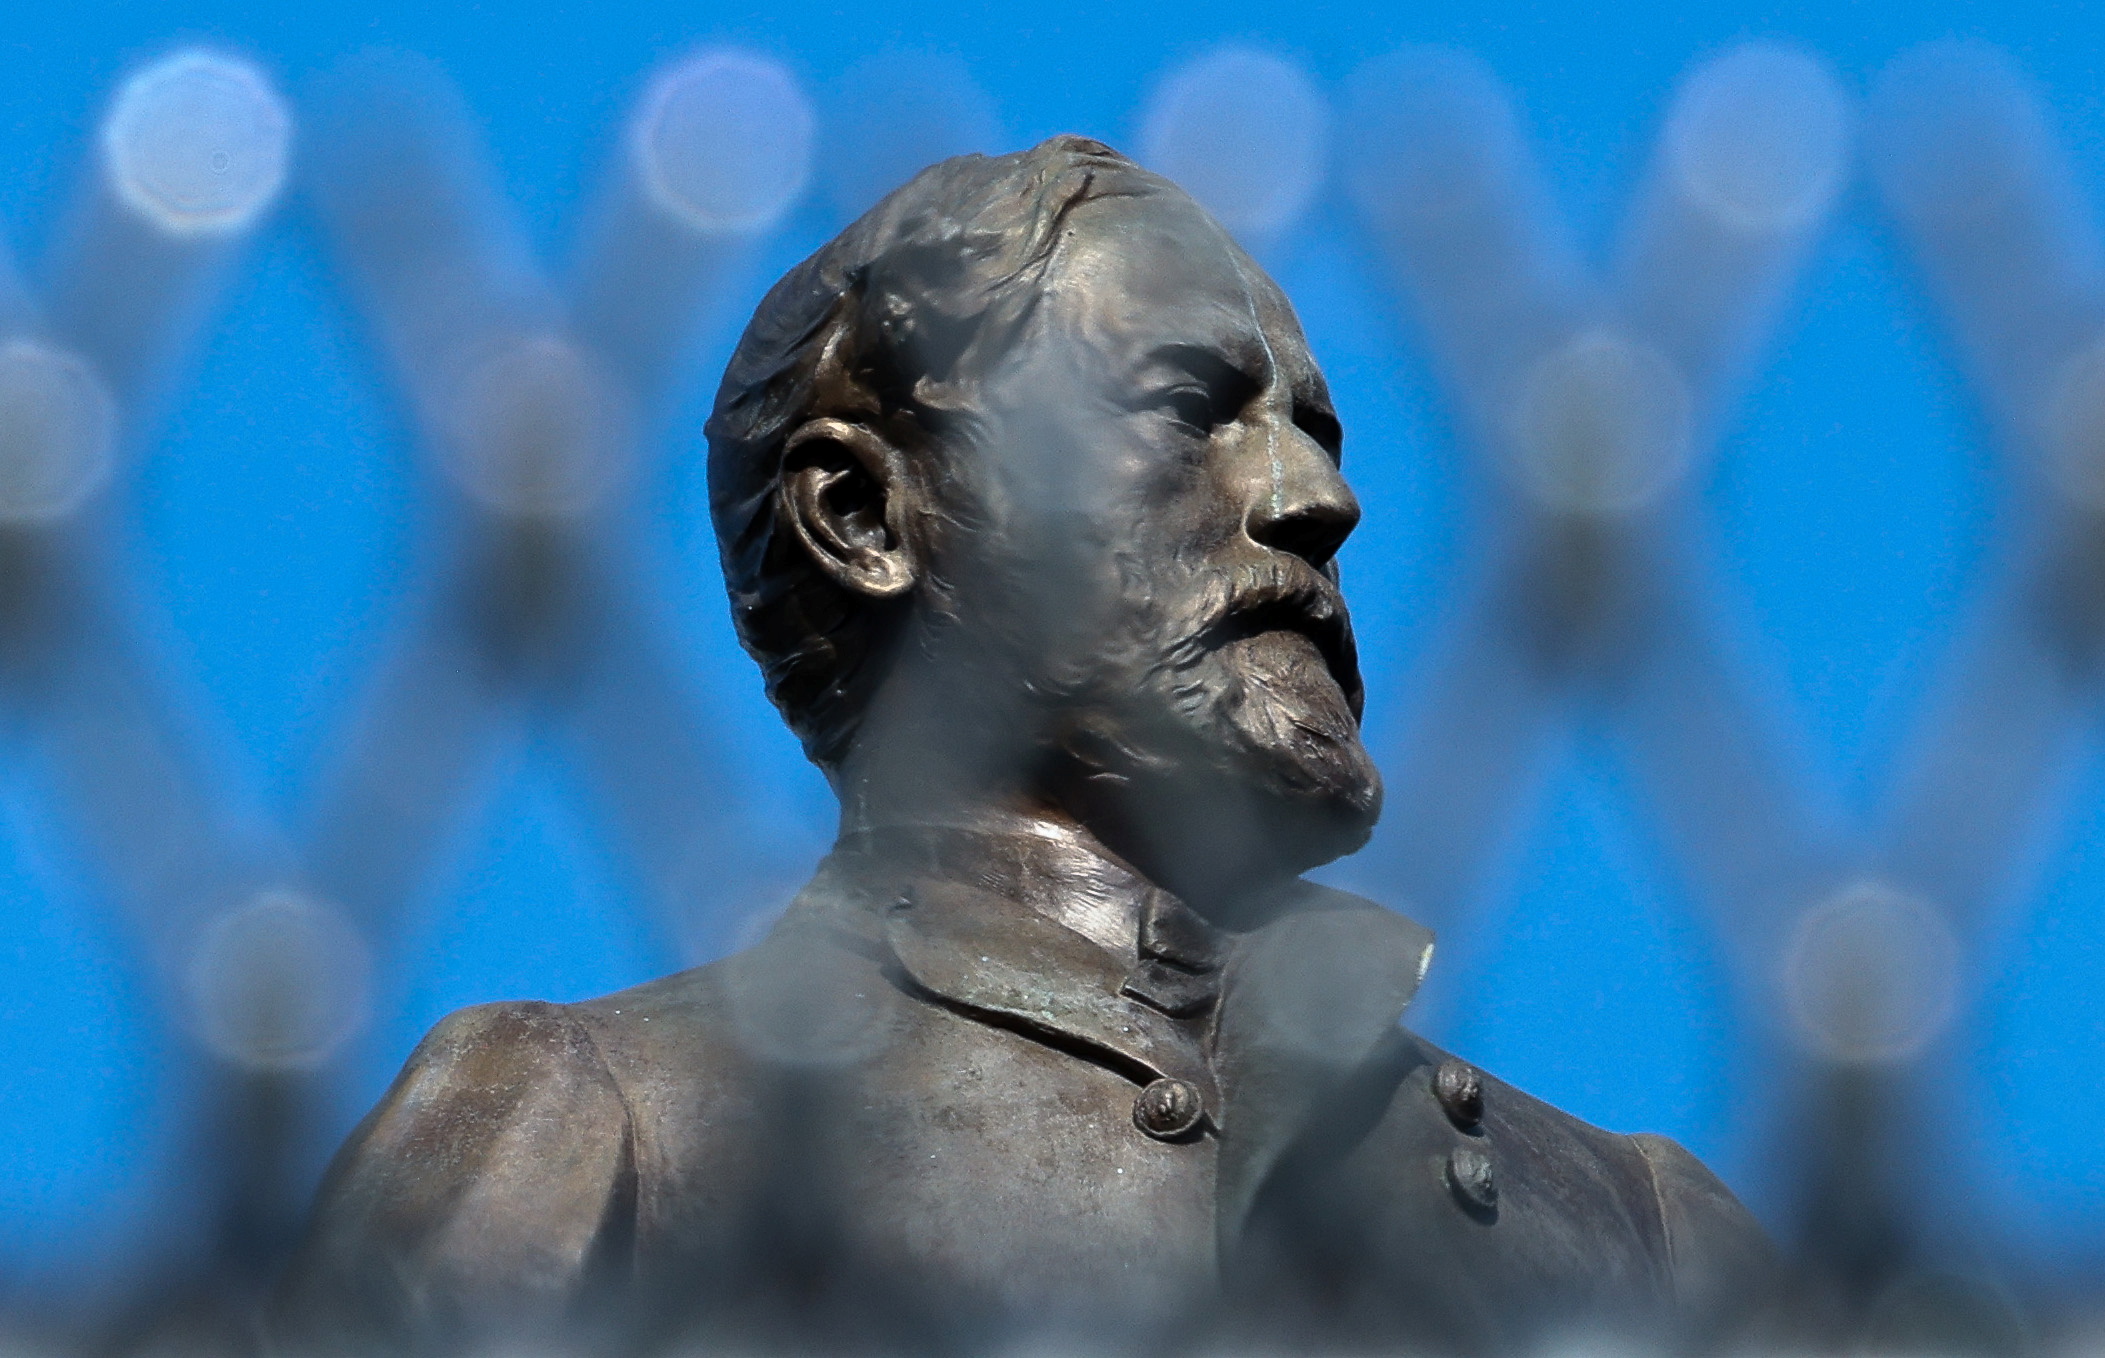 The statue of Confederate General Robert E. Lee stands behind protective fencing the day before the monument will be removed in Richmond